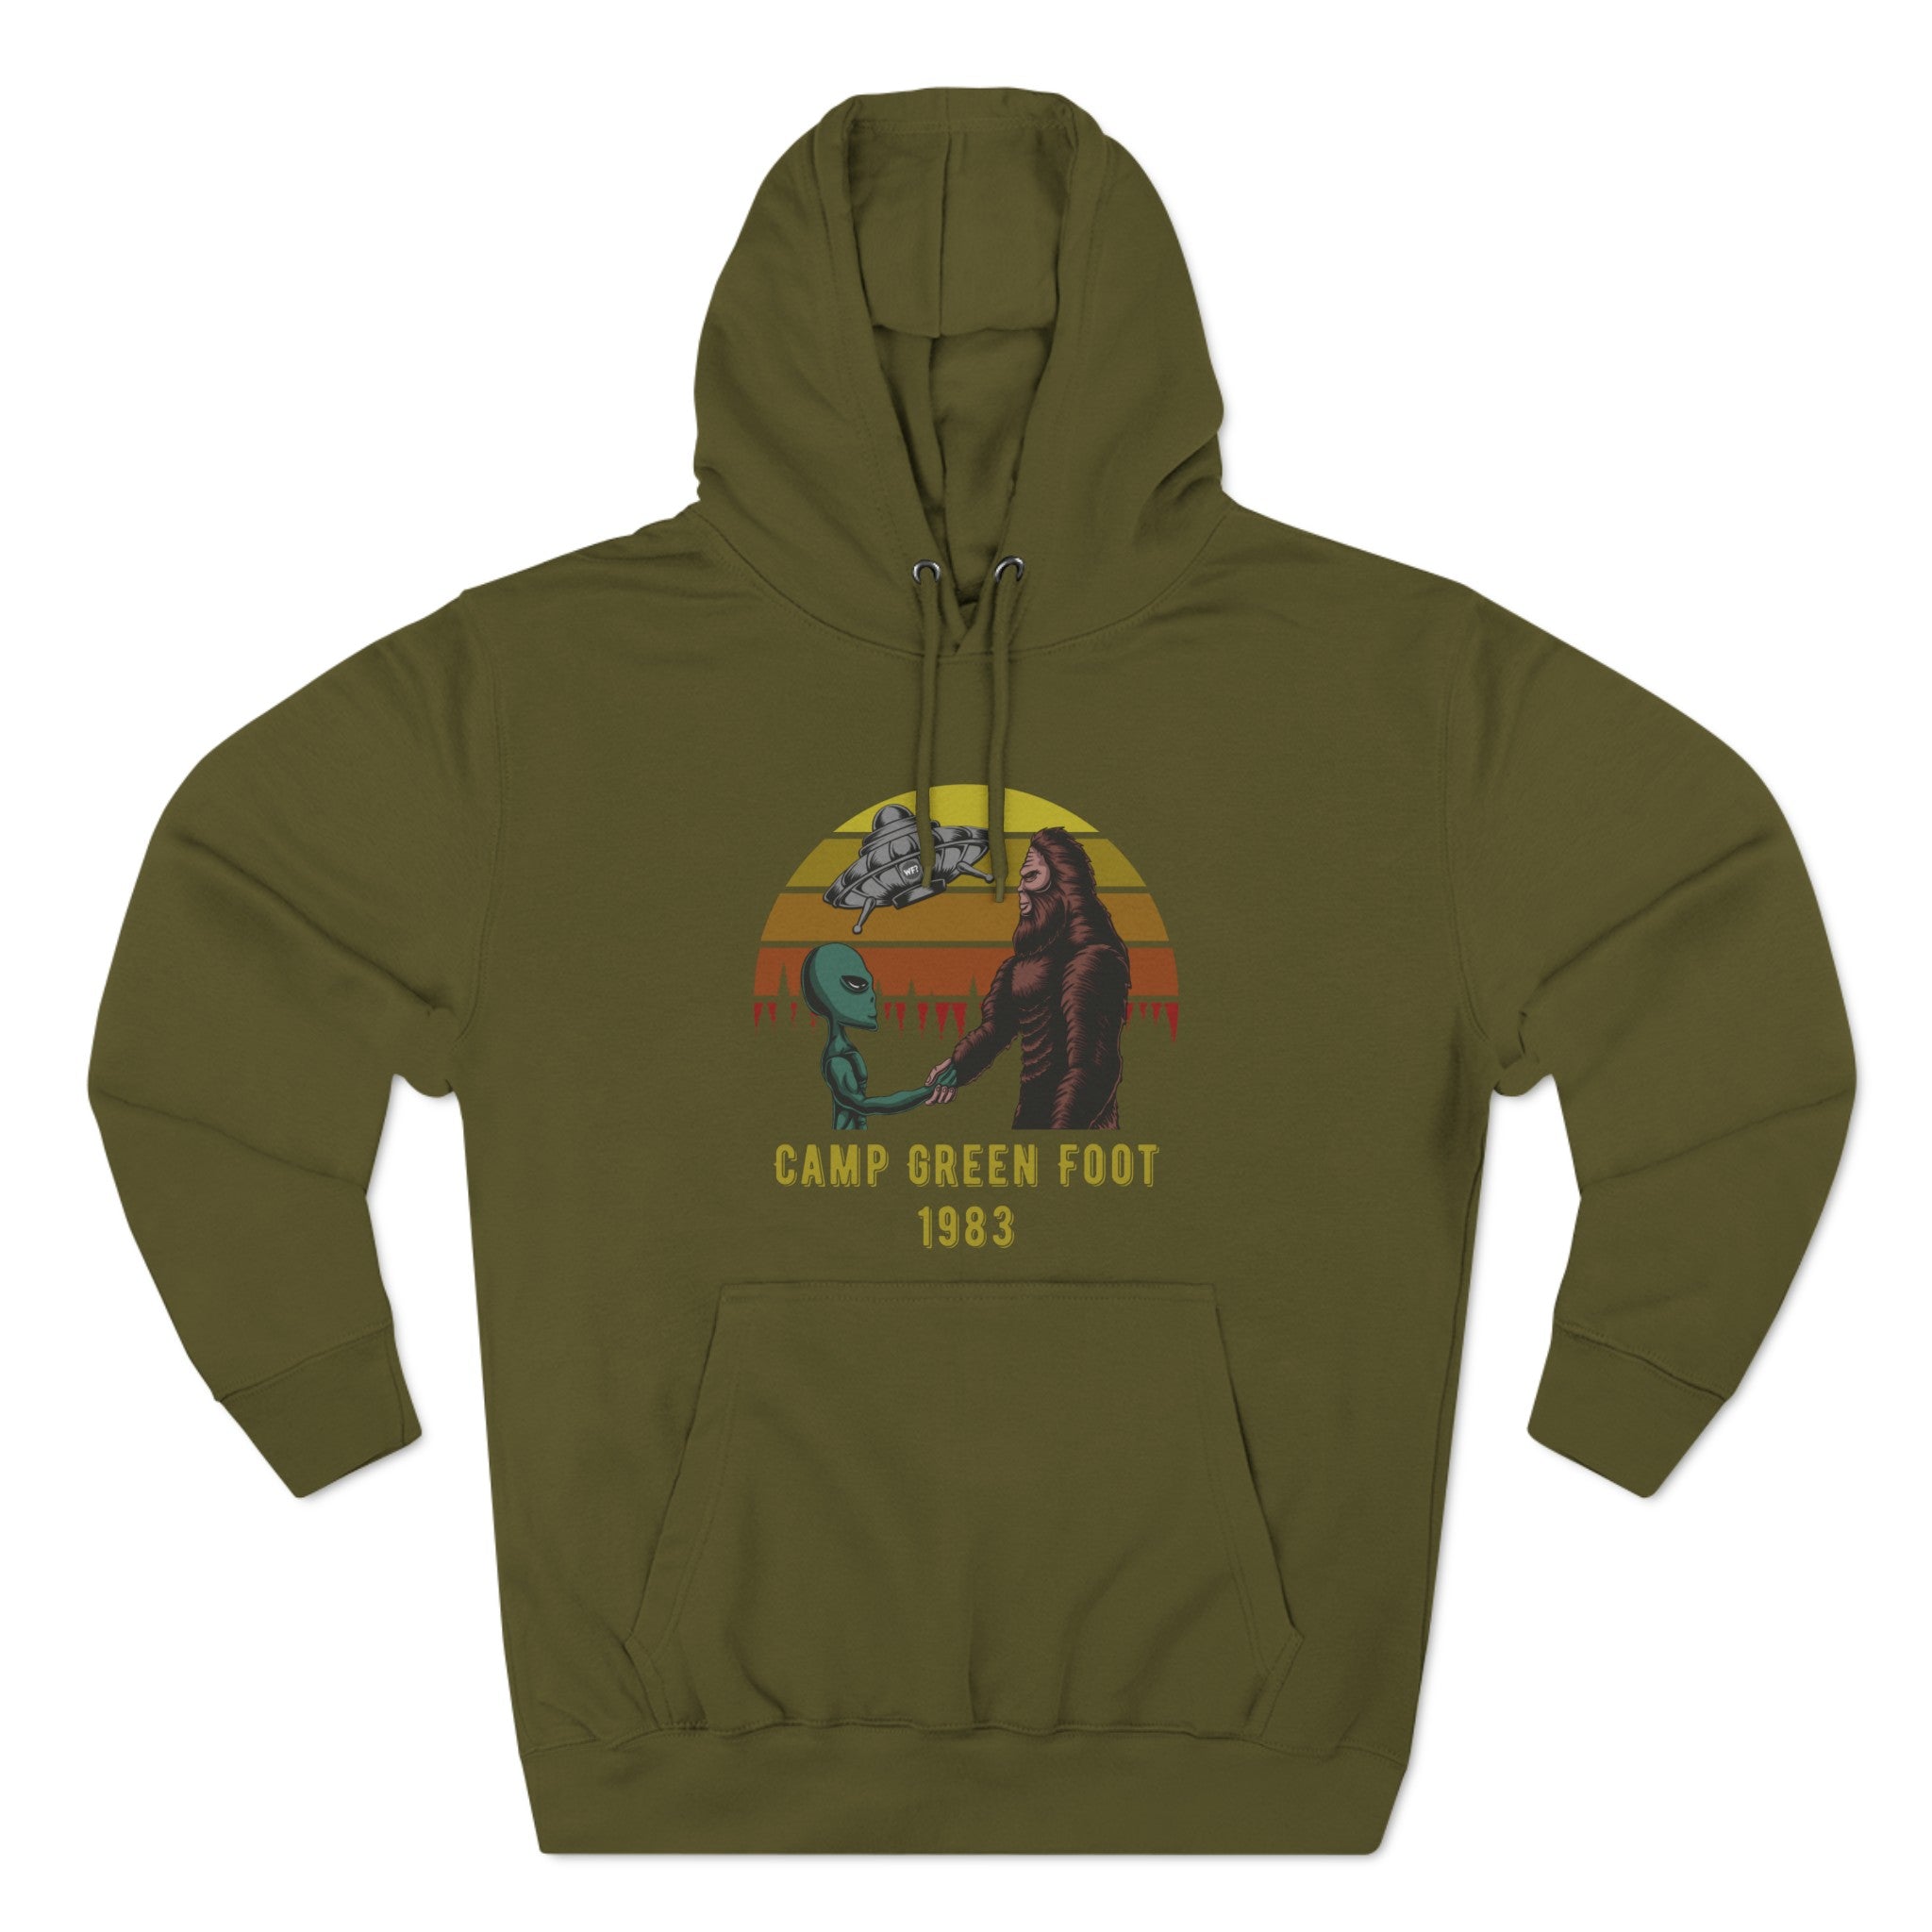 Buy army-green Camp Green Foot 1983 Unisex Pullover Hoodie